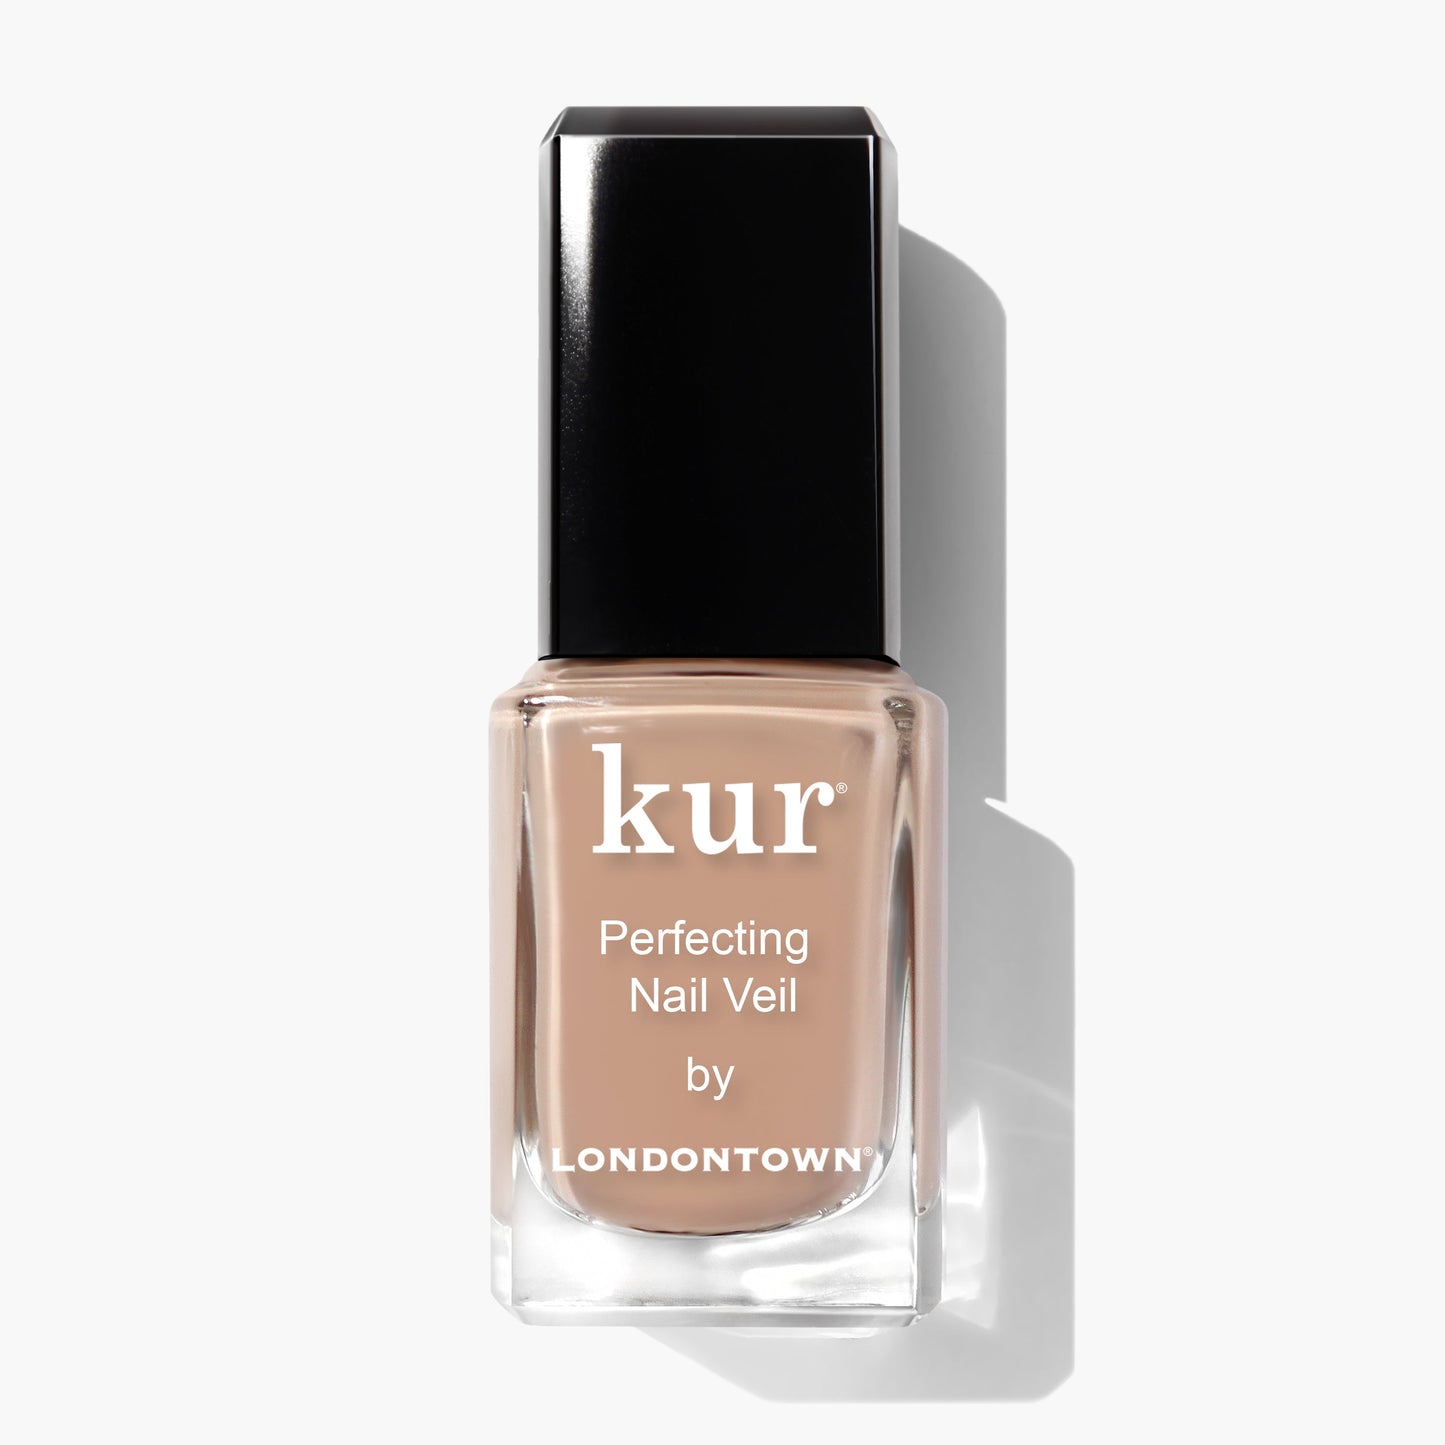 Perfecting Nail Veil #6 by LONDONTOWN